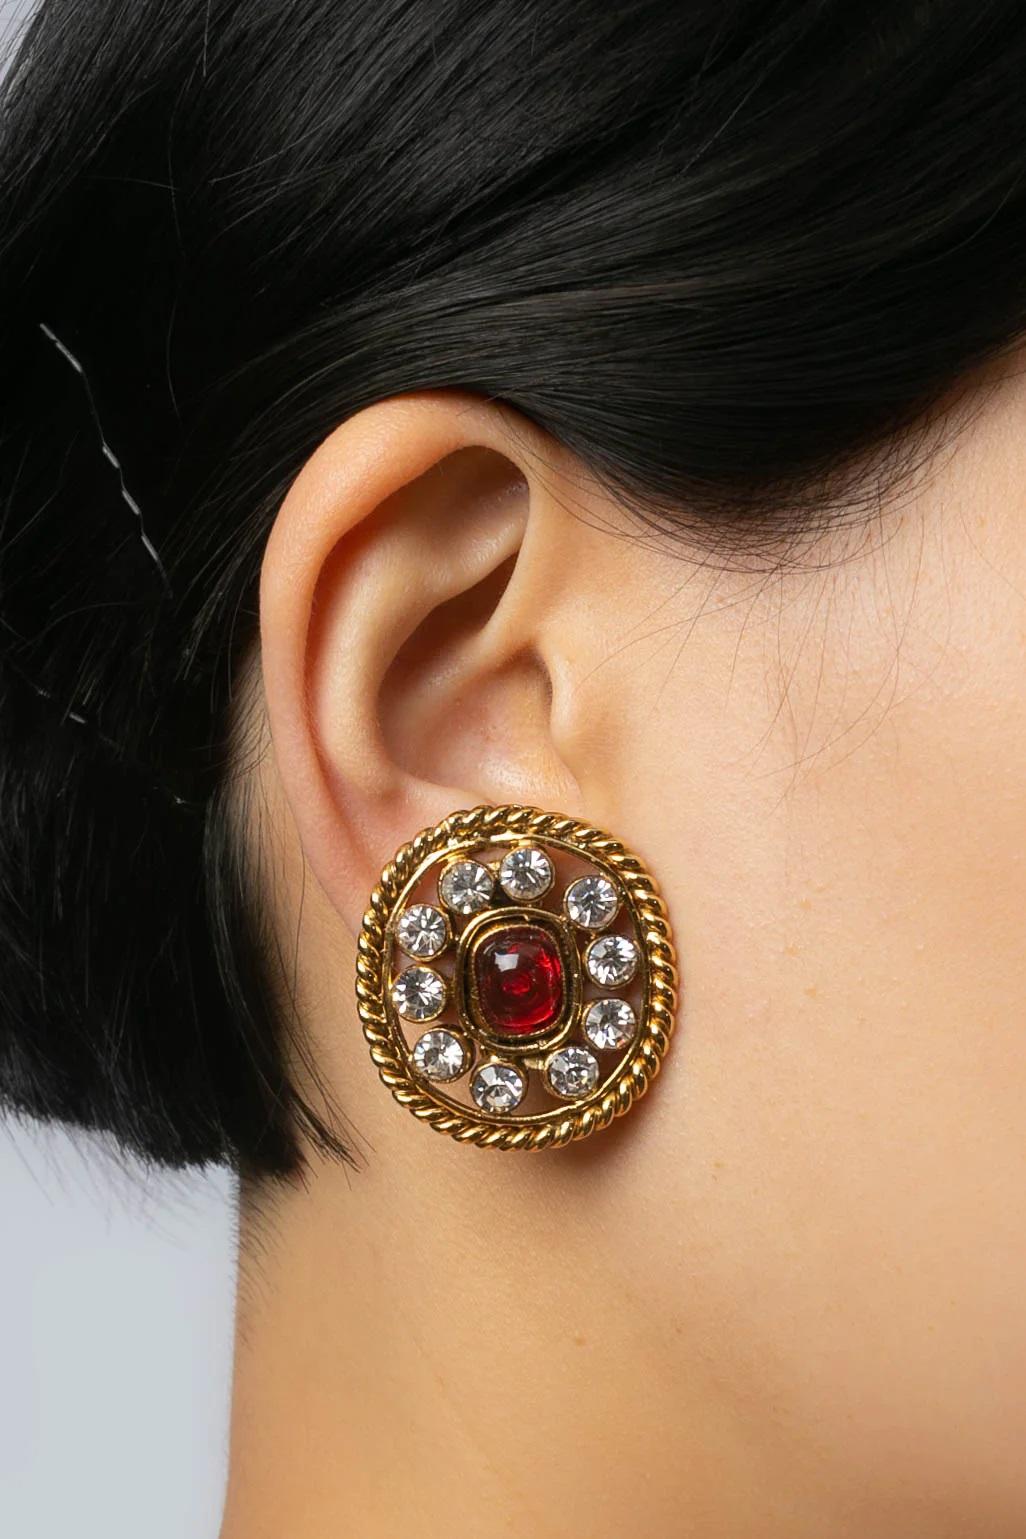 Chanel- (Made in France) Clip on gilded metal earrings decorated with rhinestones and a red glass paste cabochon.

Additional information:

Dimensions: 
3.2 W x 3.5 H cm (1.25